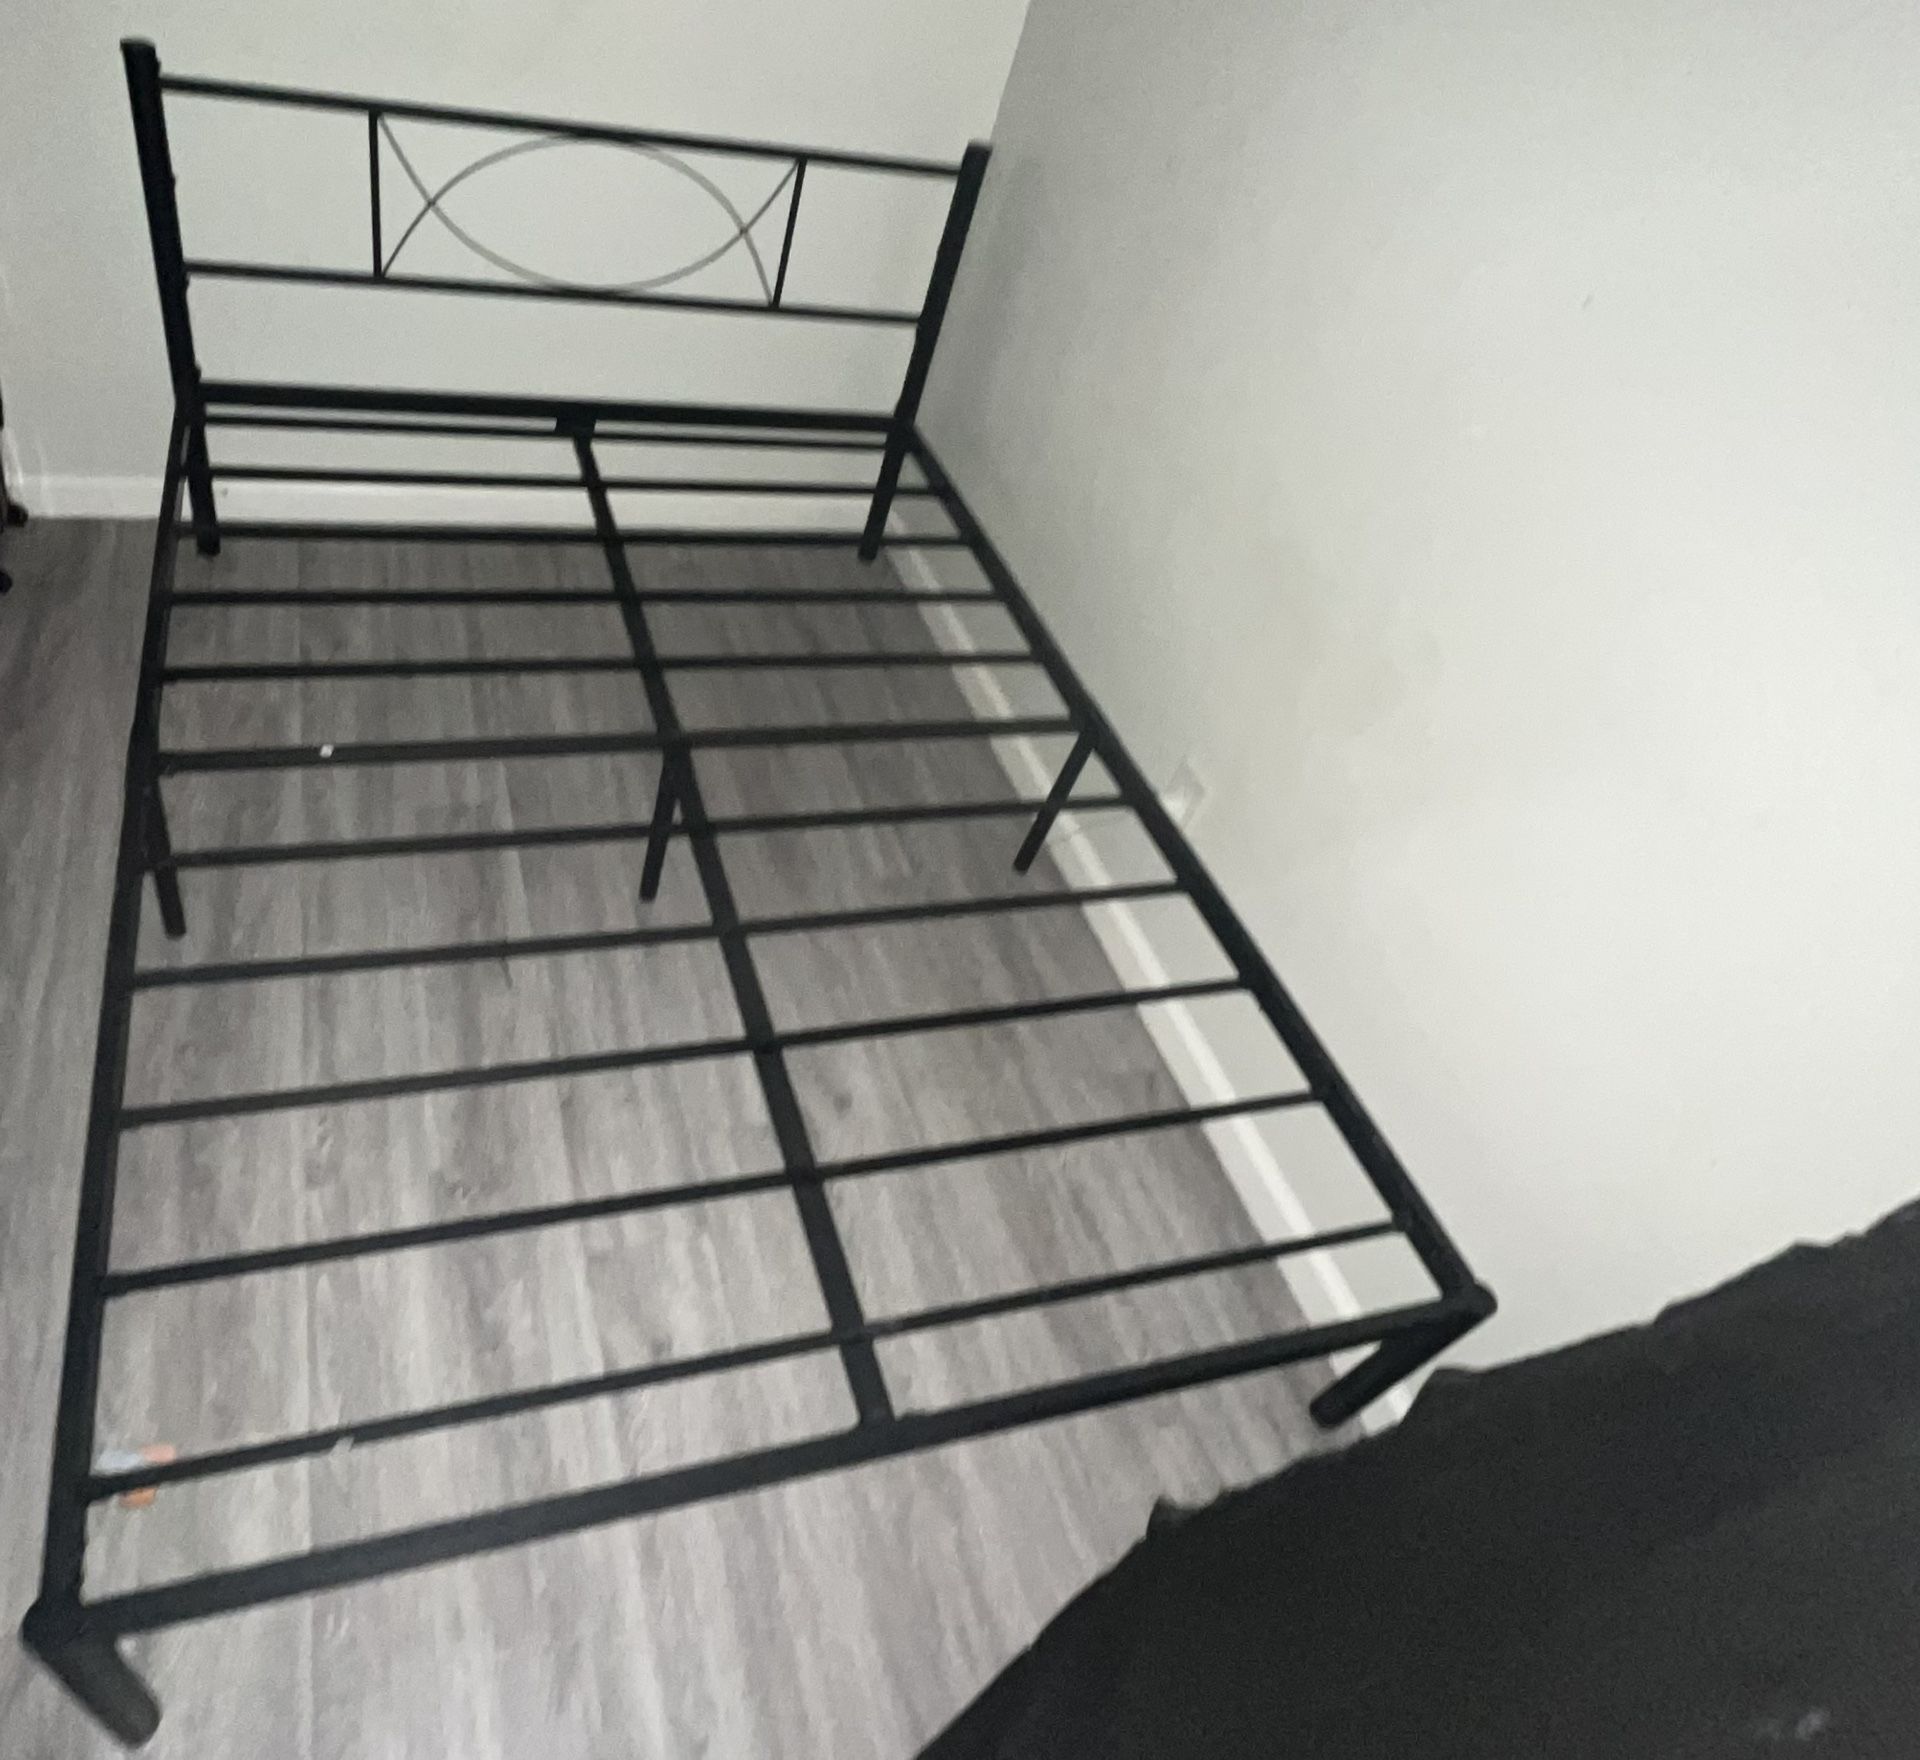 Metal Bed Frame Full Size With Headboard 